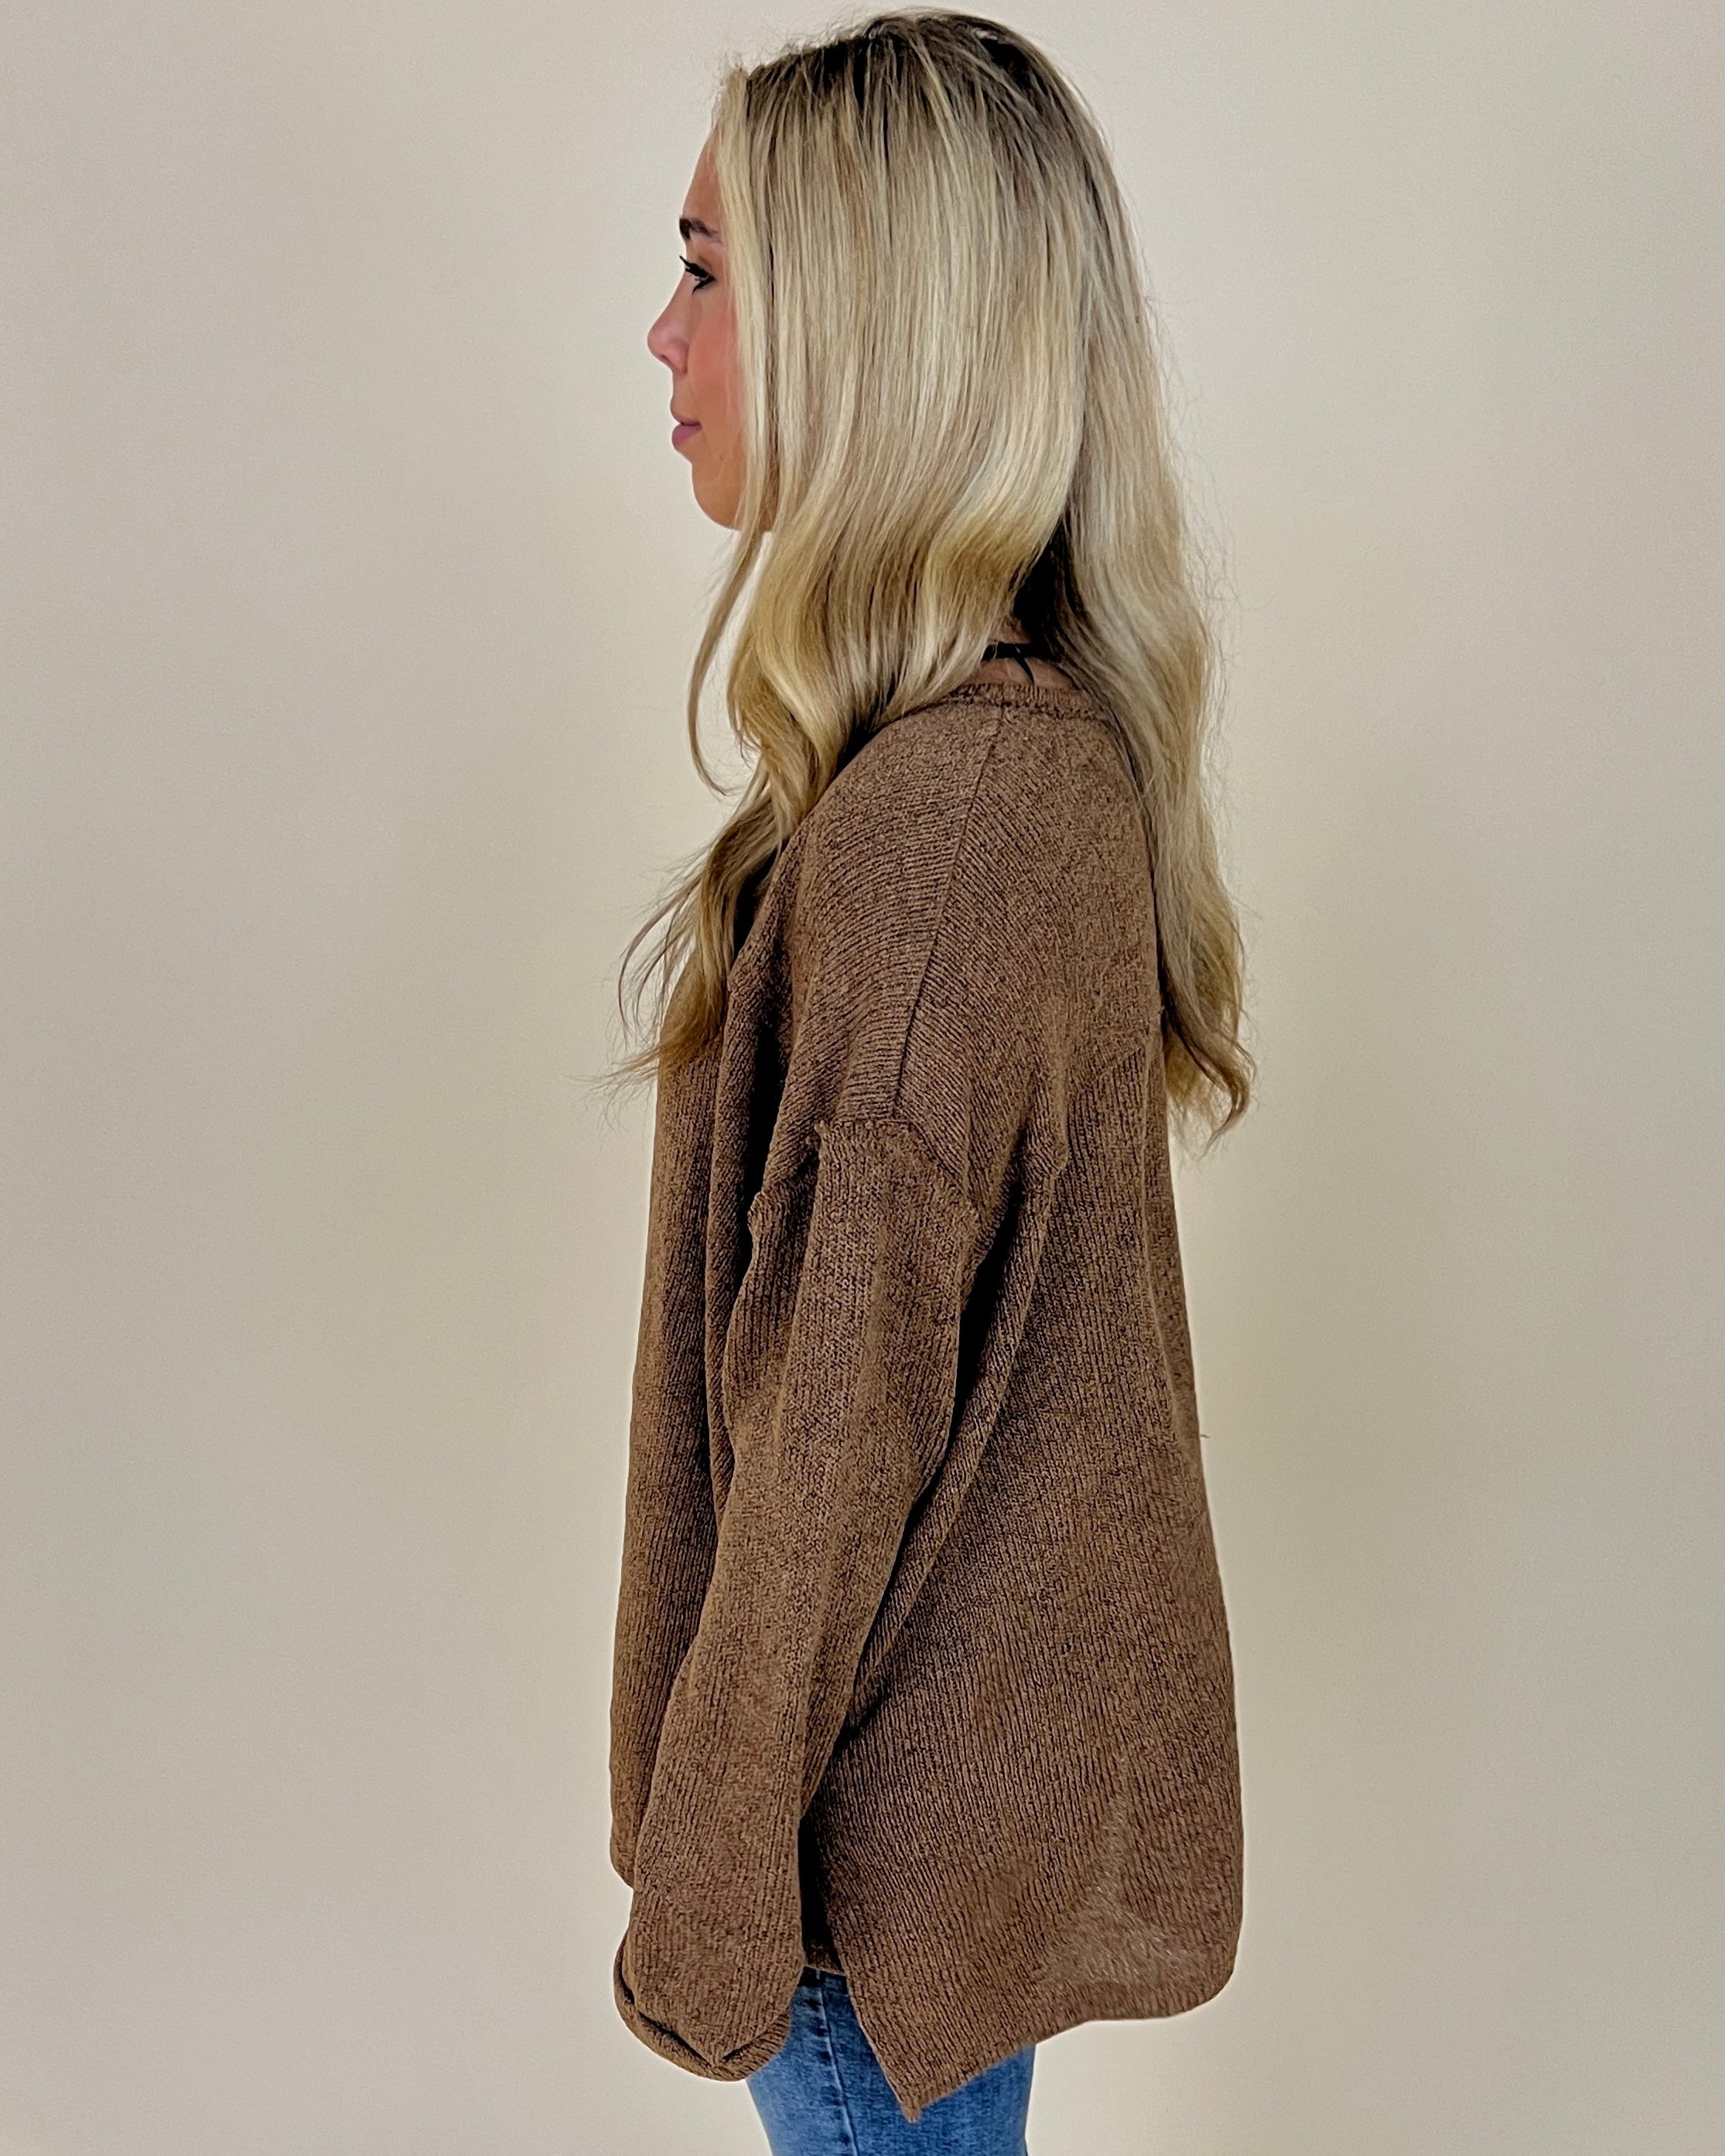 Call Me Later Ochre Knit Boxy Raw Edge Top-Shop-Womens-Boutique-Clothing